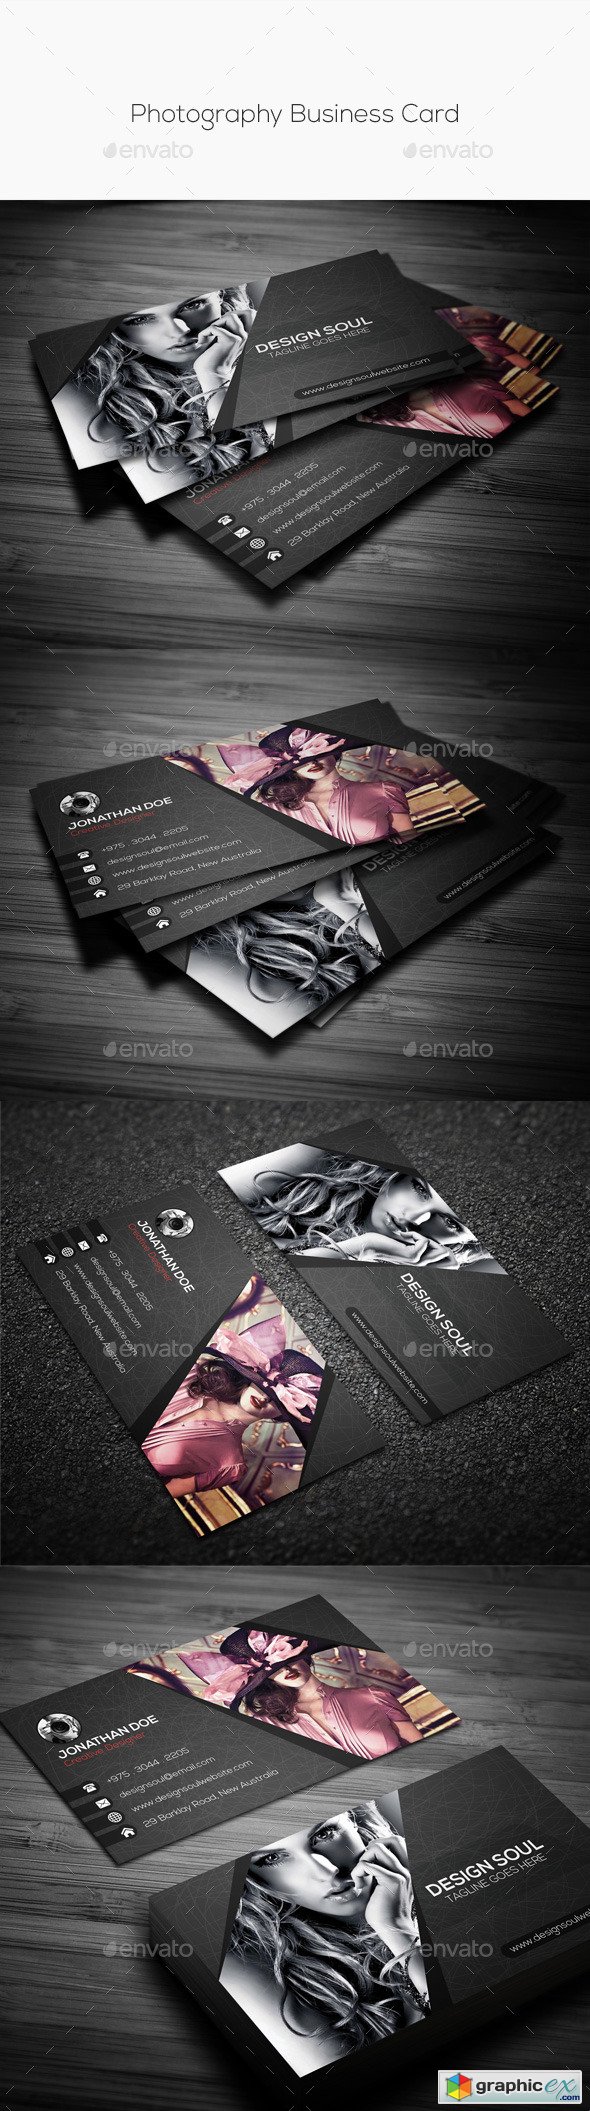 Photography Business Card 10361368